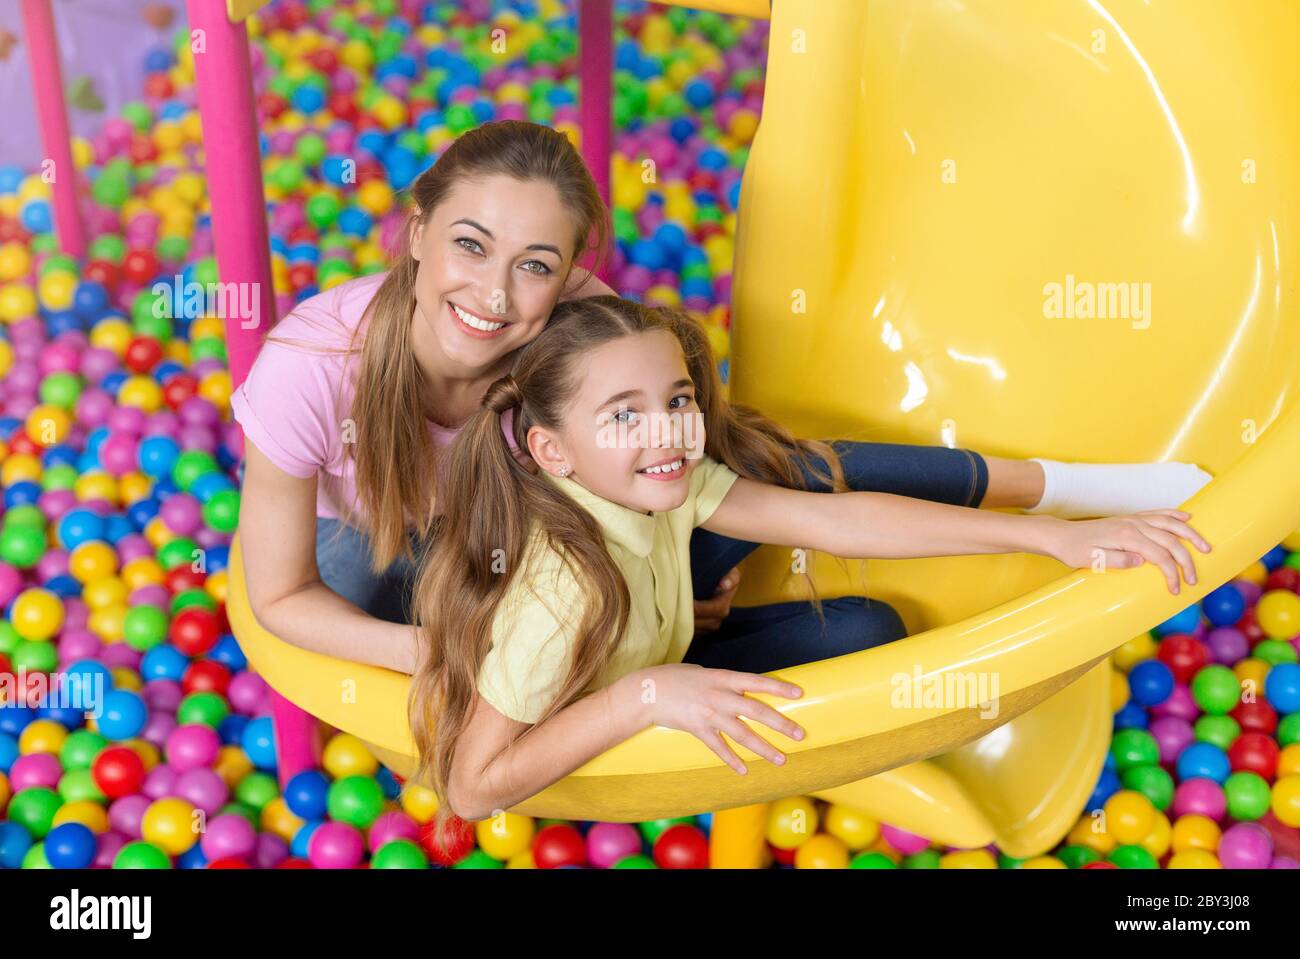 Cheerful girl with her mom sitting on slide at indoor children playground Stock Photo